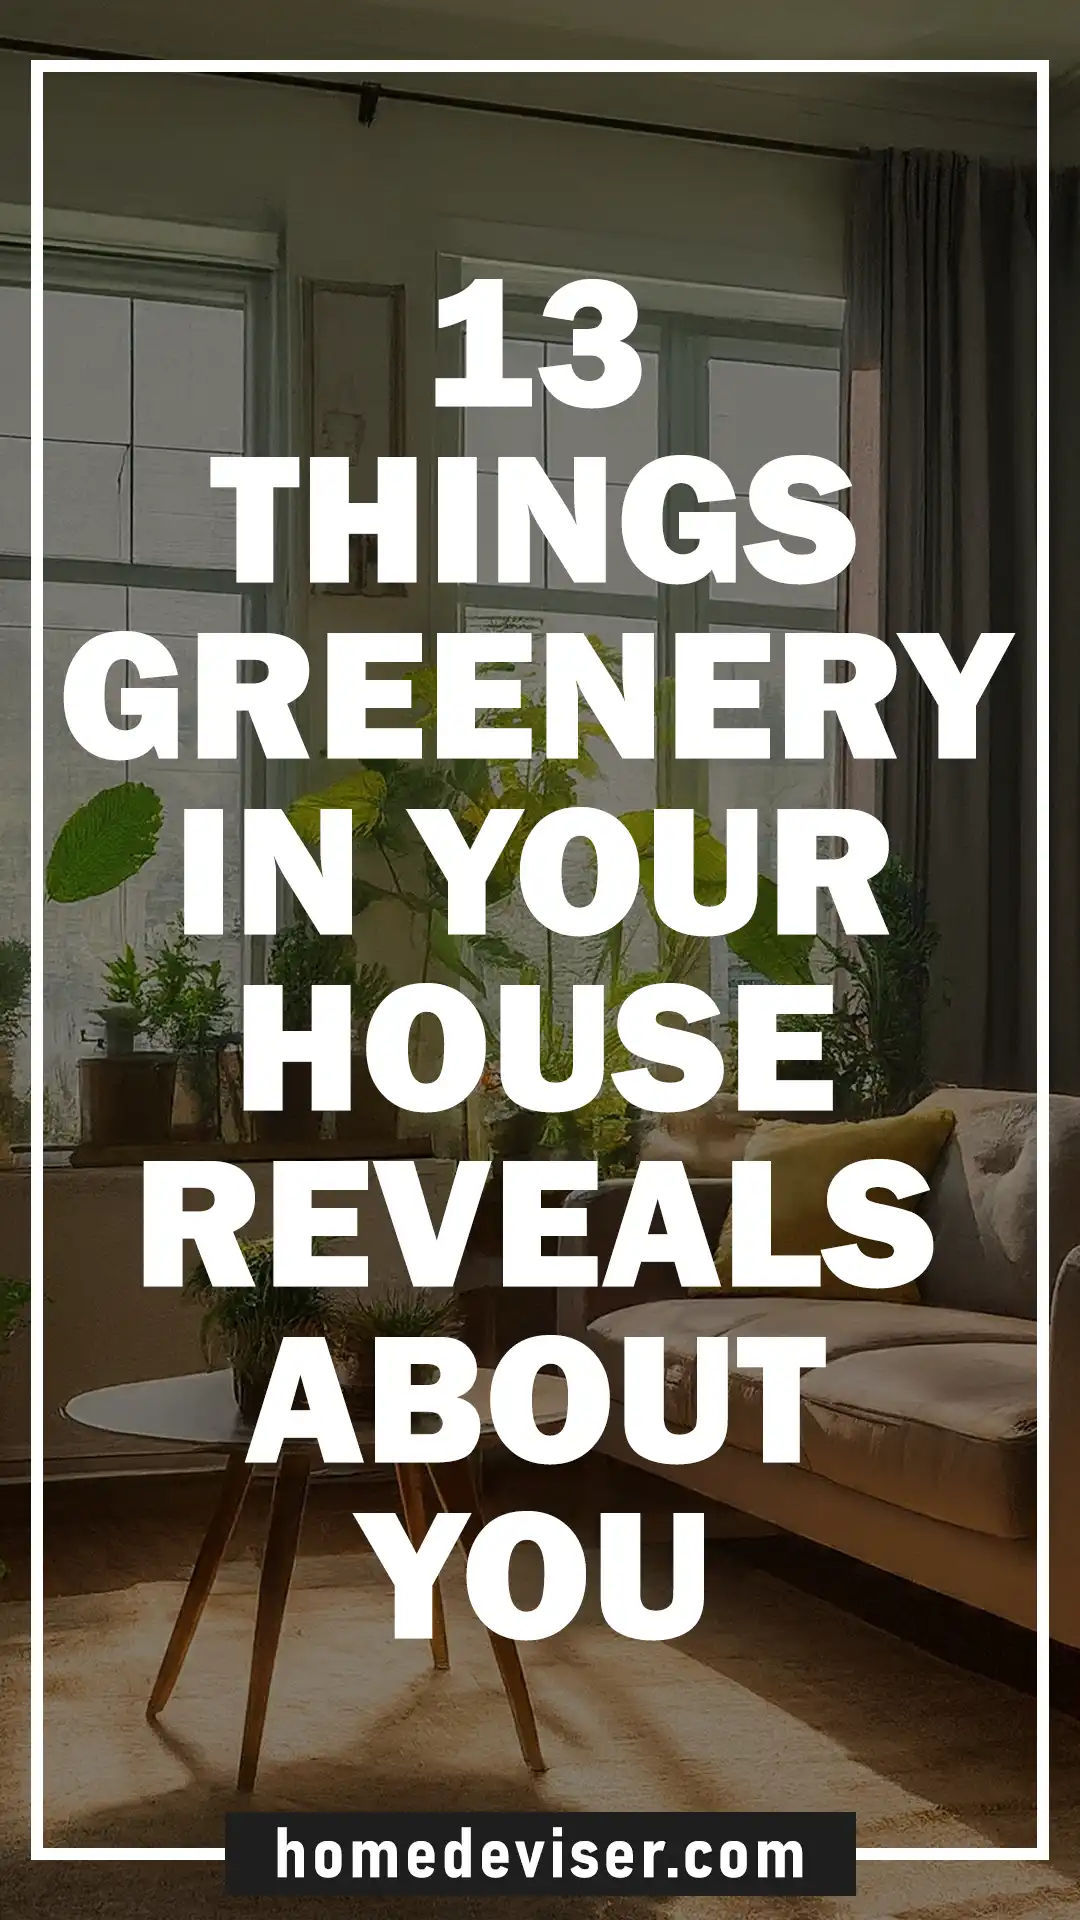 Things Greenery in Your House Reveals About You